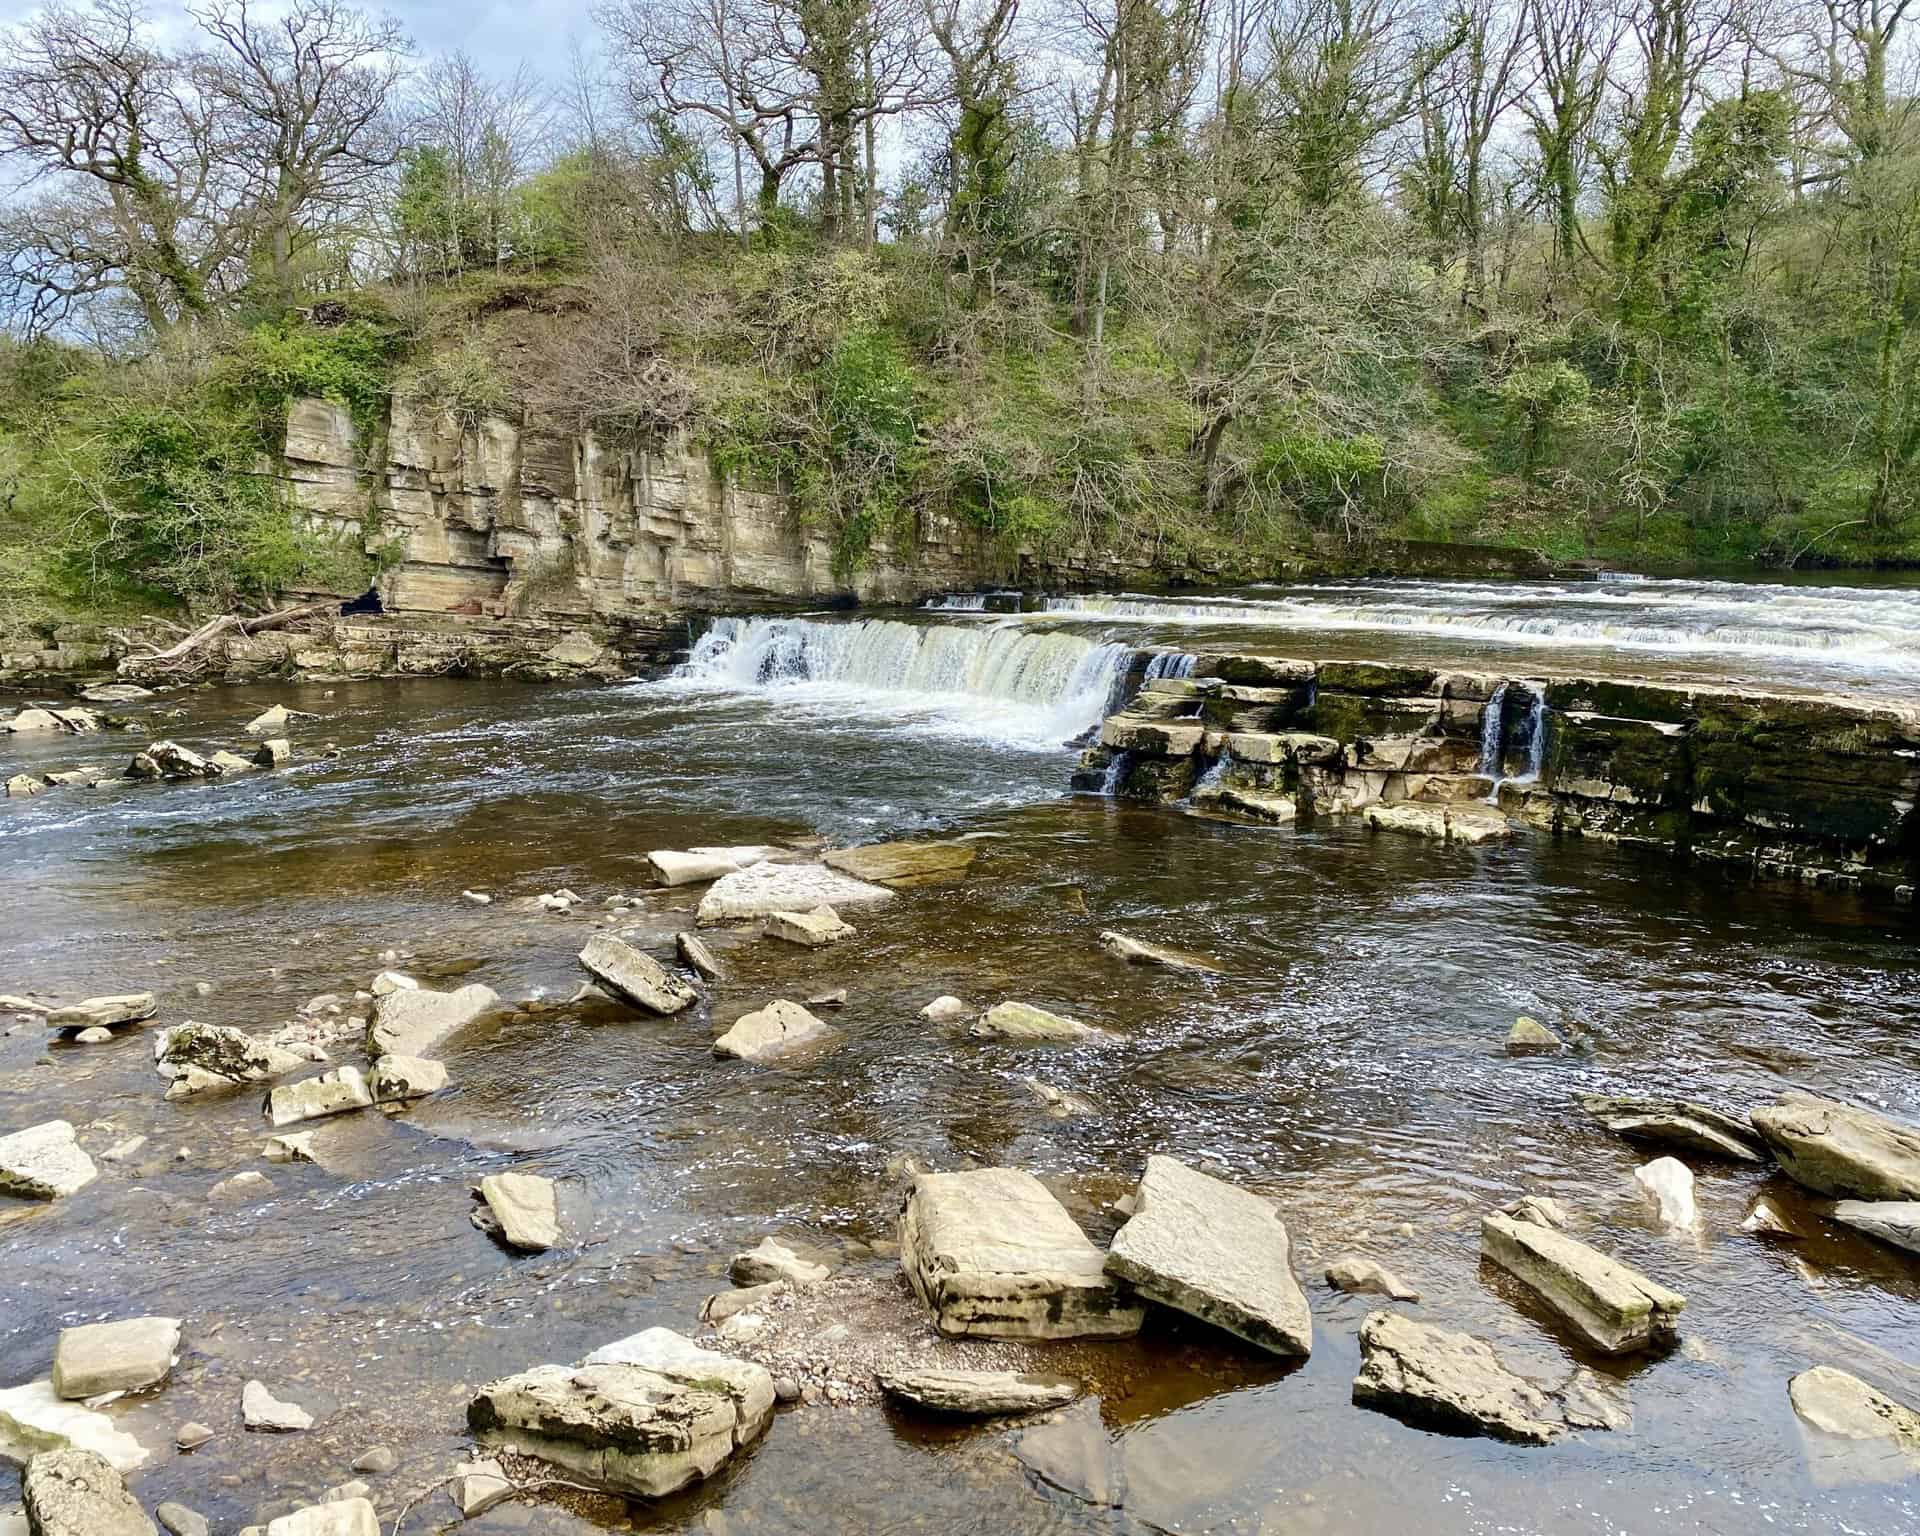 Cascading waterfalls of the River Swale in Richmond's town centre.